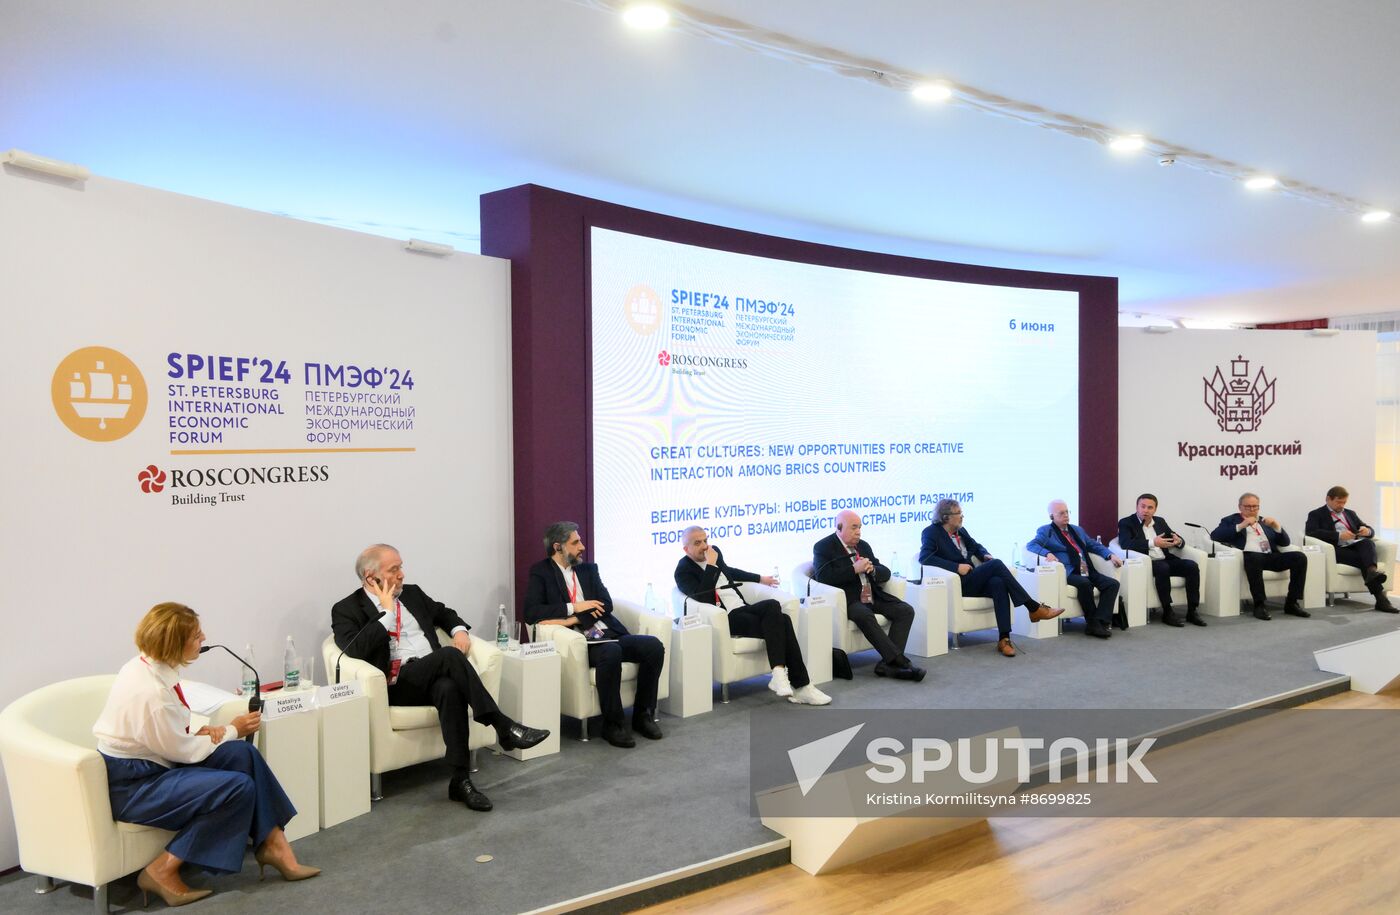 SPIEF-2024. Great Cultures: New Opportunities for Creative Interaction among BRICS Countries